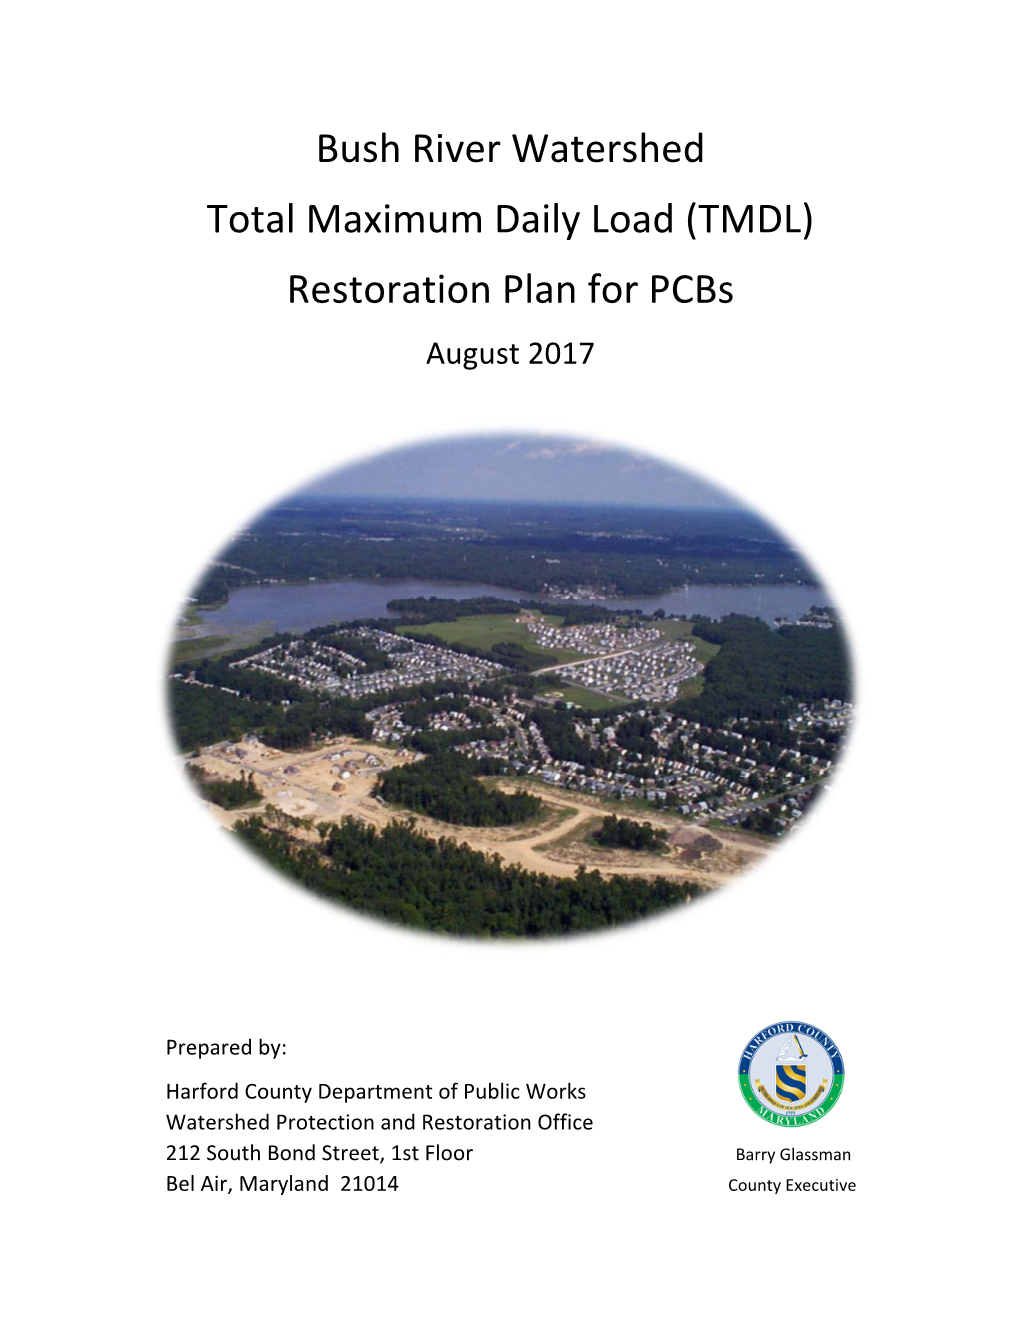 Bush River Watershed Total Maximum Daily Load (TMDL) Restoration Plan for Pcbs August 2017